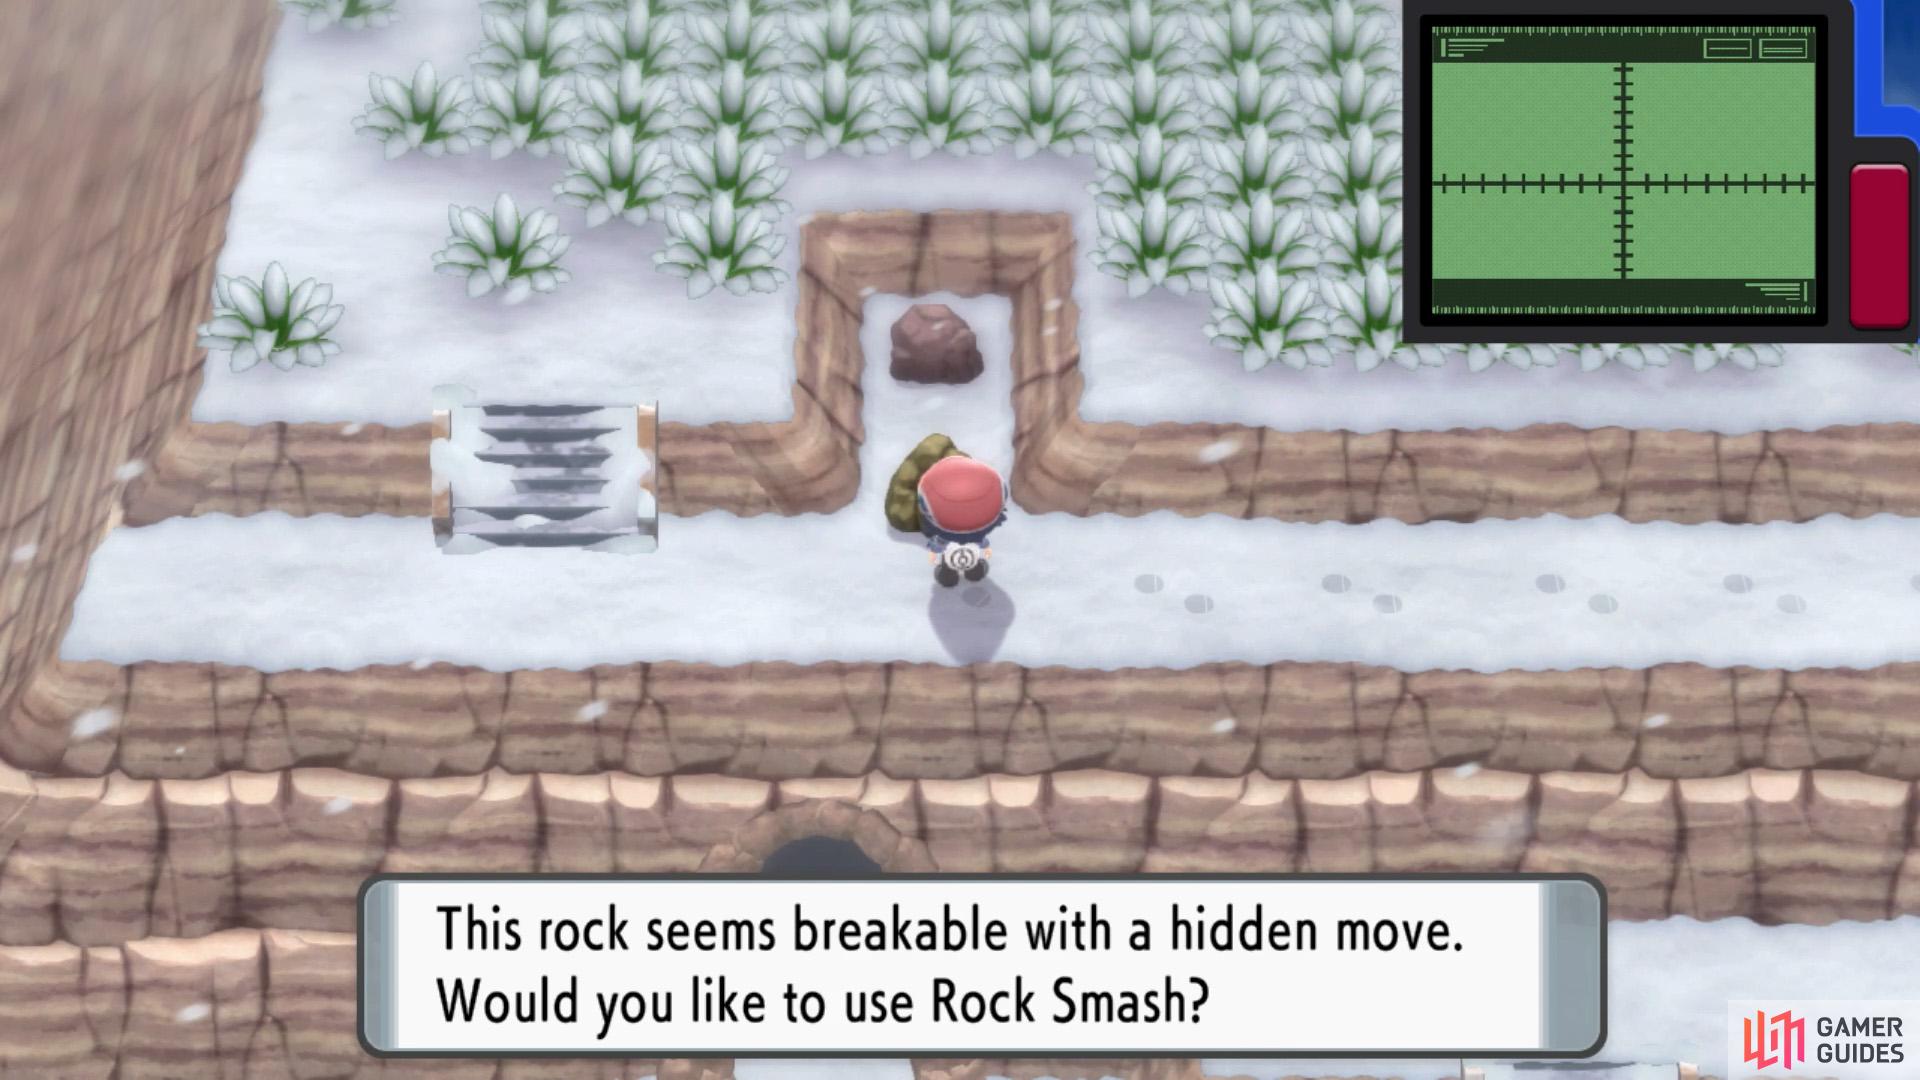 Further west, there's a suspicious rock behind a cracked rock…